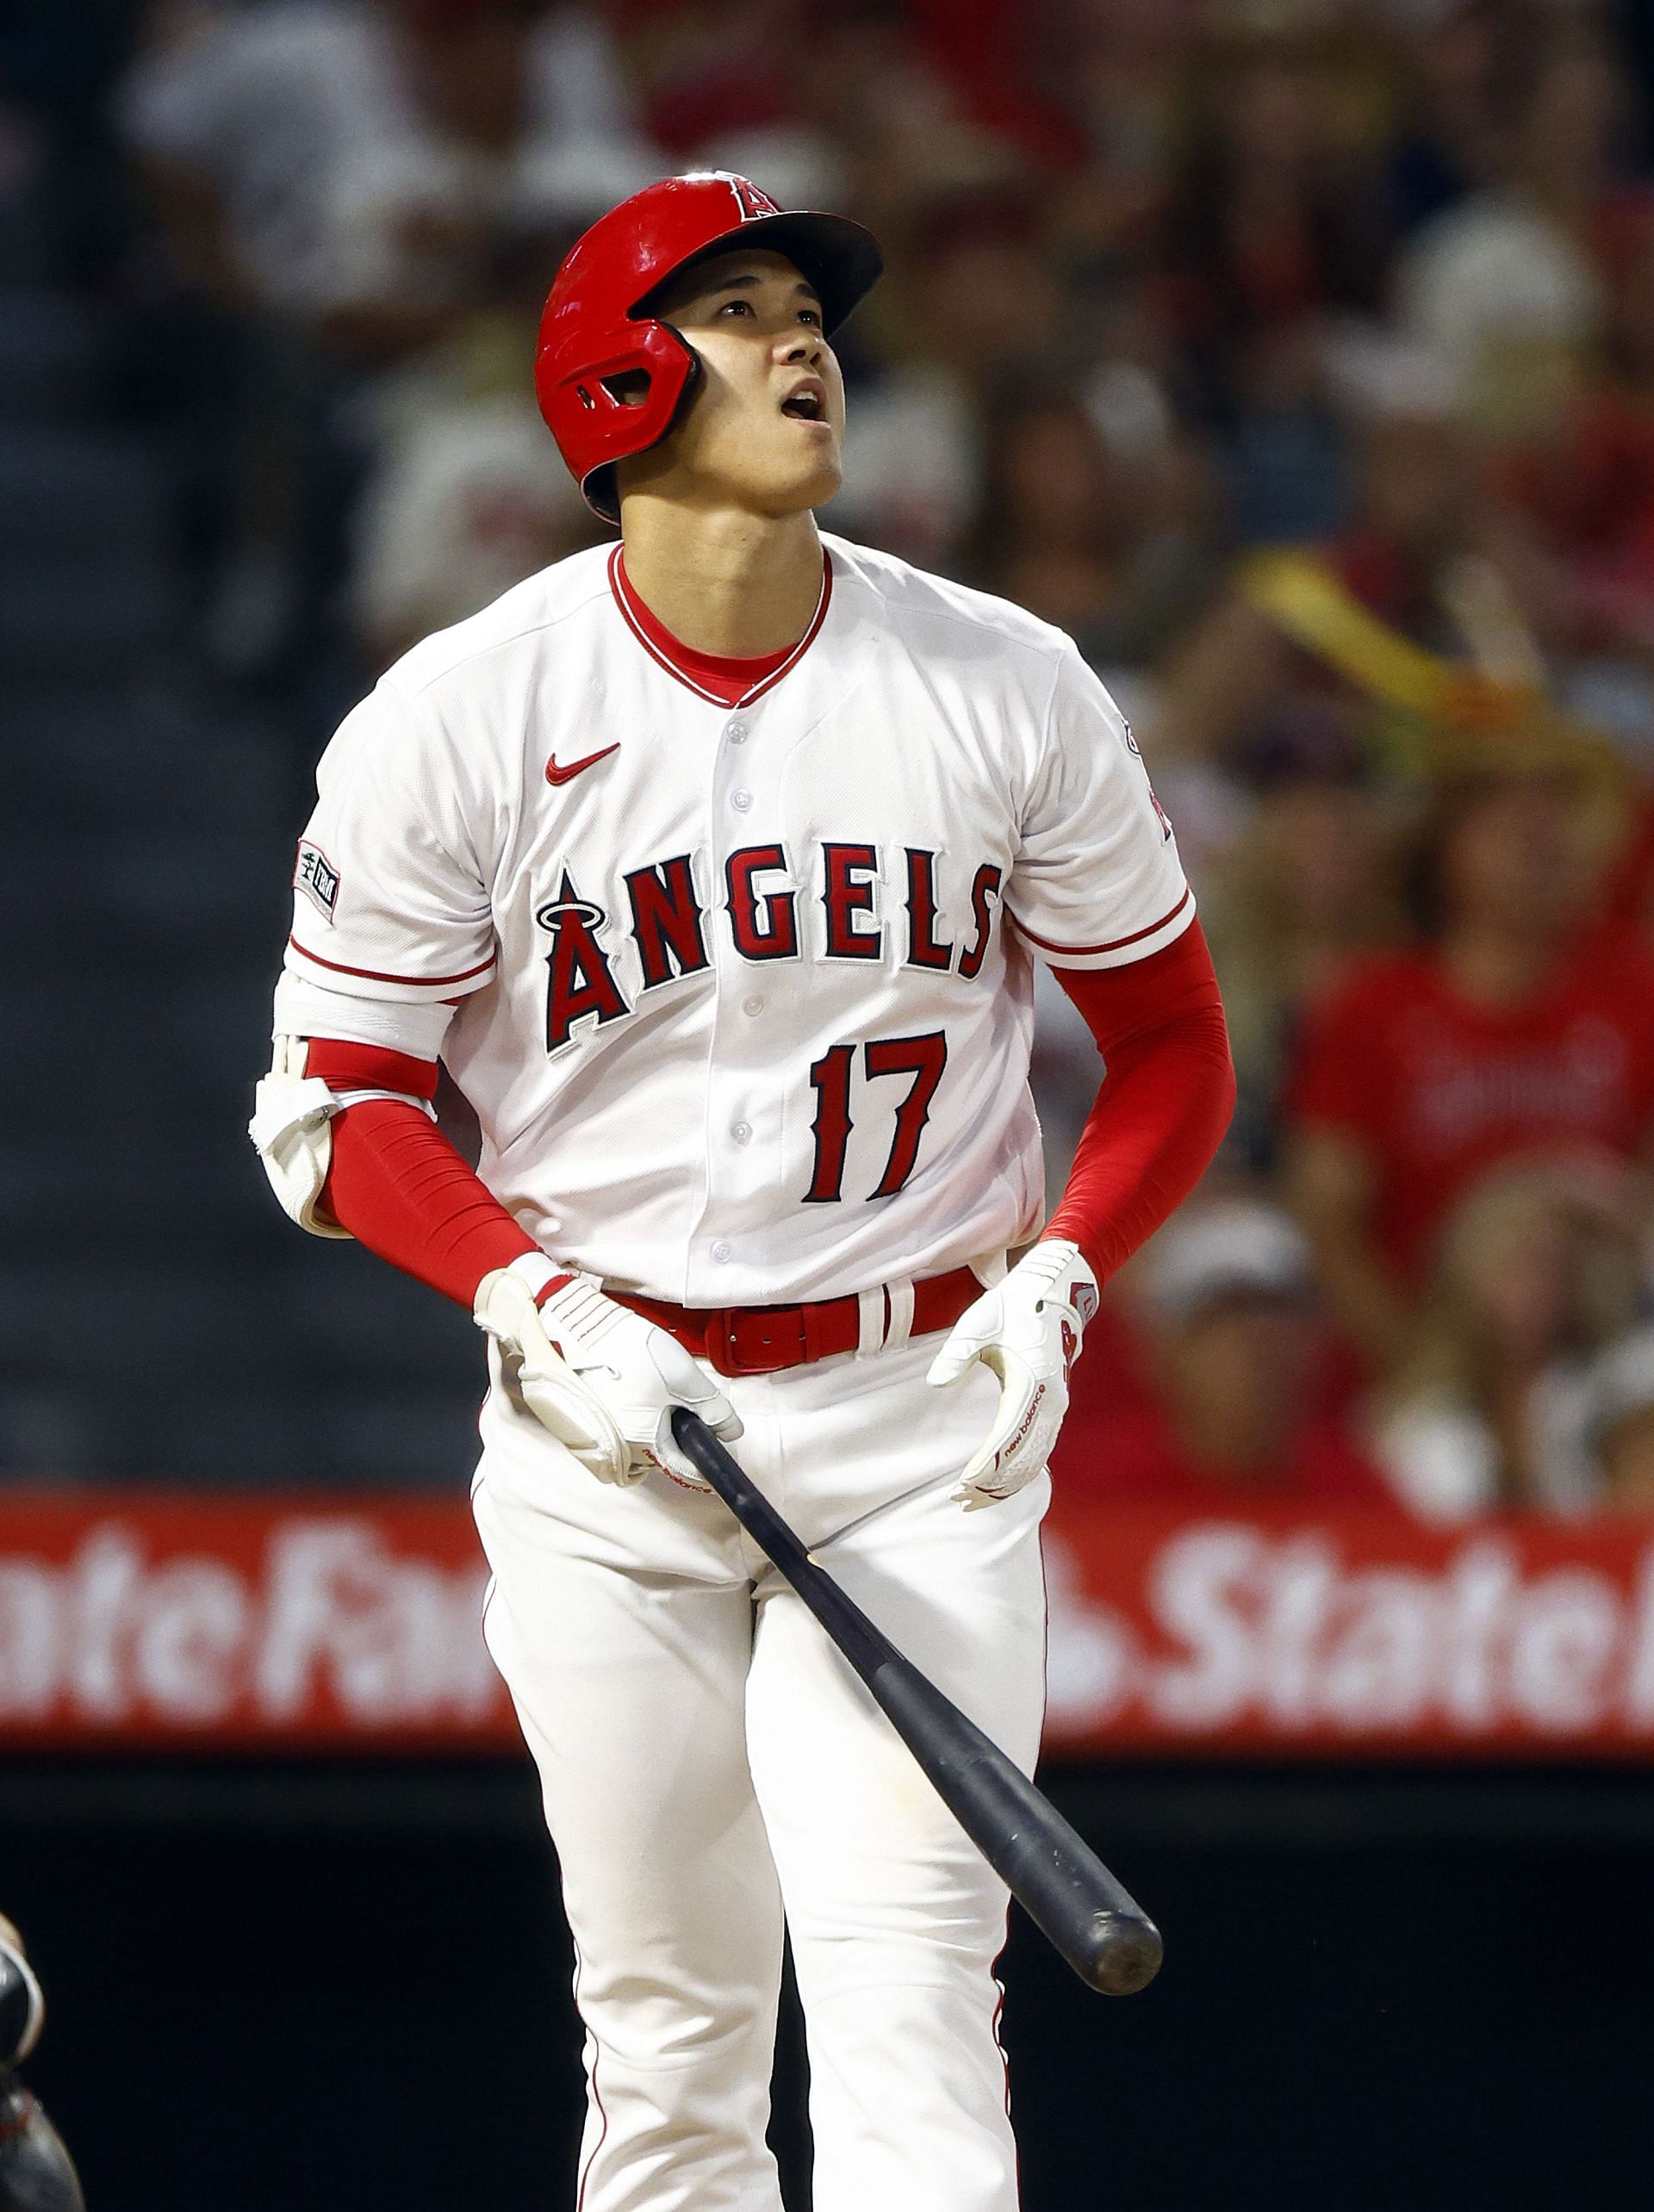 Shohei Ohtani #17 of the Los Angeles Angels hits a home run against the Arizona Diamondbacks in the sixth inning at Angel Stadium of Anaheim on June 30, 2023 in Anaheim, California. (Photo by Ronald Martinez/Getty Images)